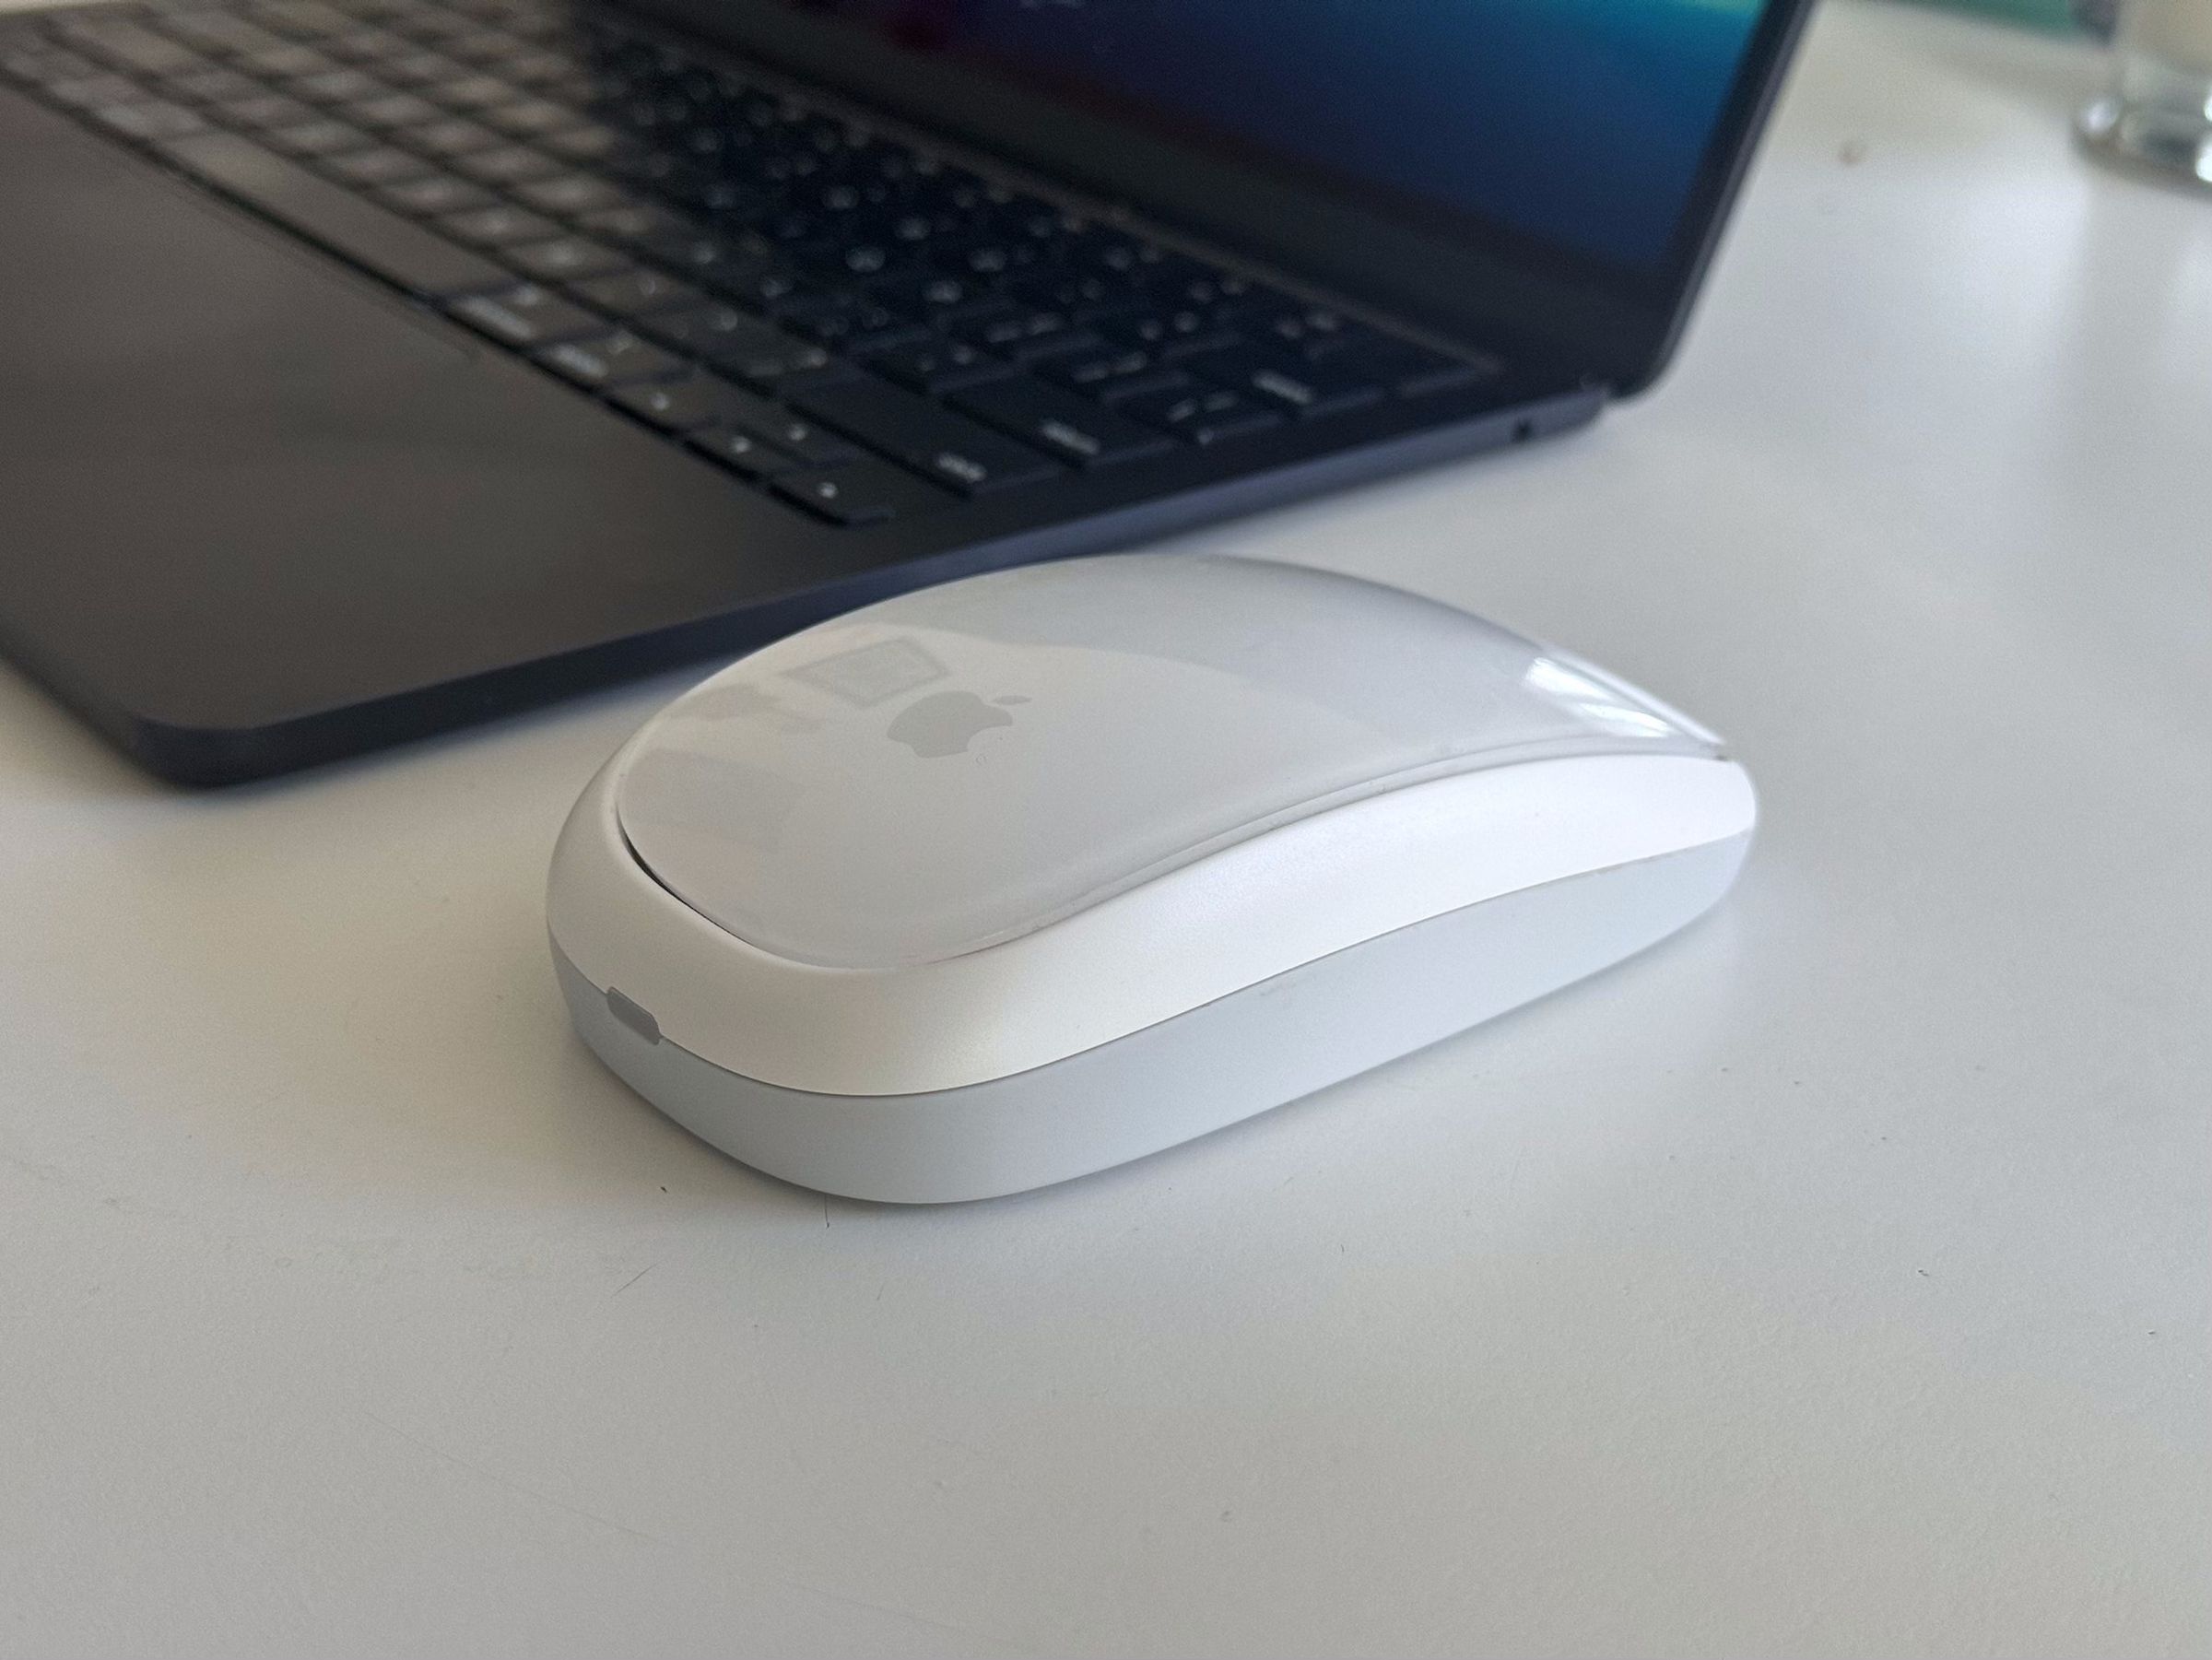 A picture of the Magic Mouse 2 in the Tatofy grip.